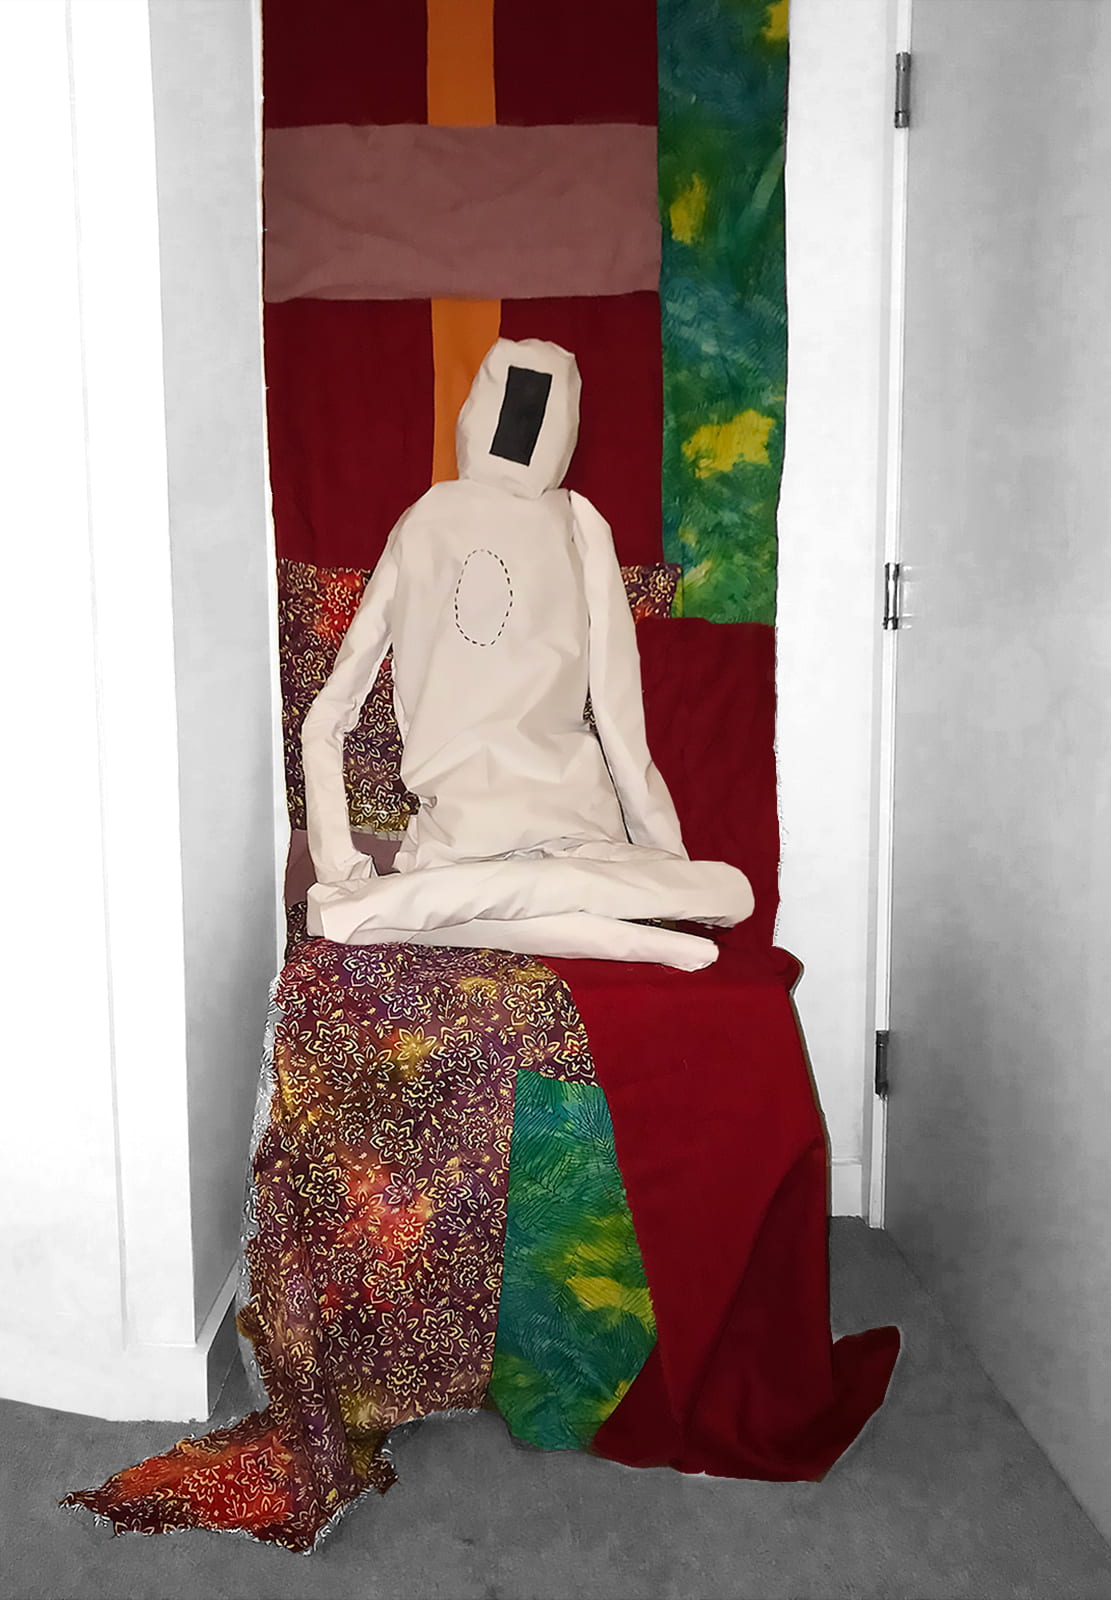 abstract figure made of cloth on a colourful fabric